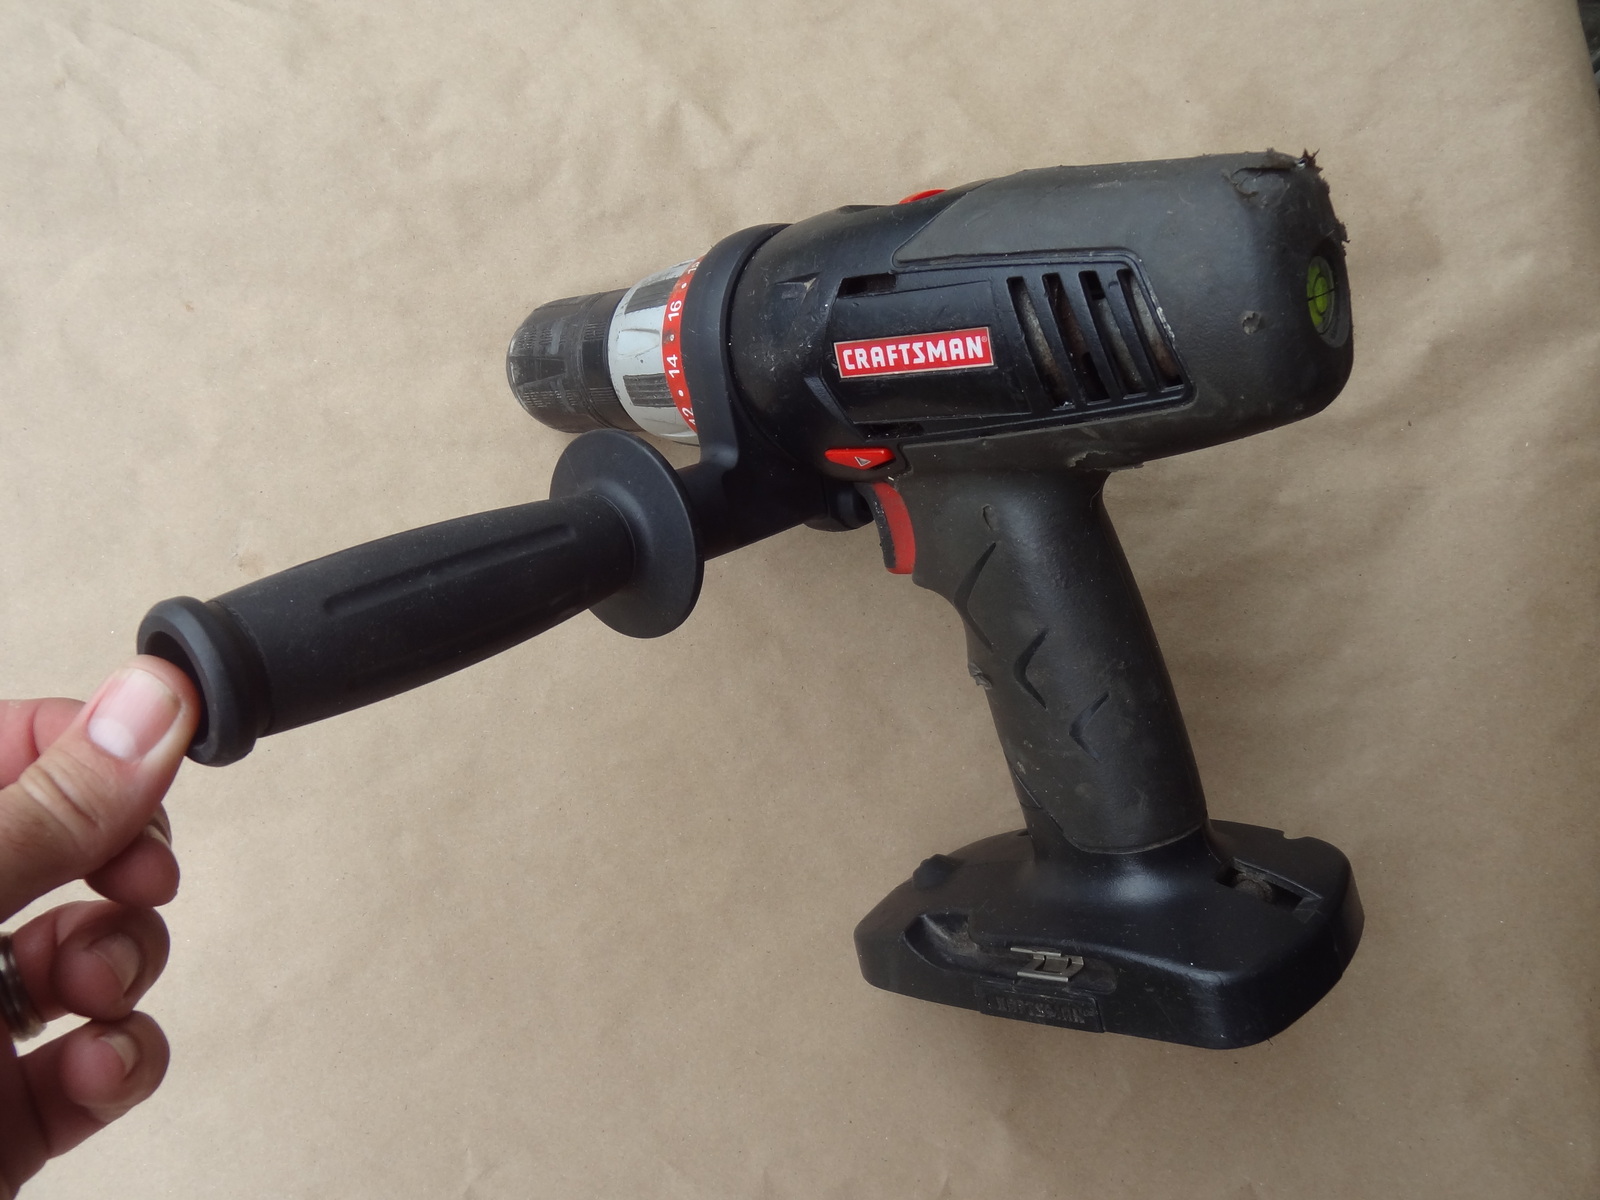 CRAFTSMAN 19.2V 19.2 VOLT CORDLESS DRILL BARE TOOL ONLY 315.115410 W